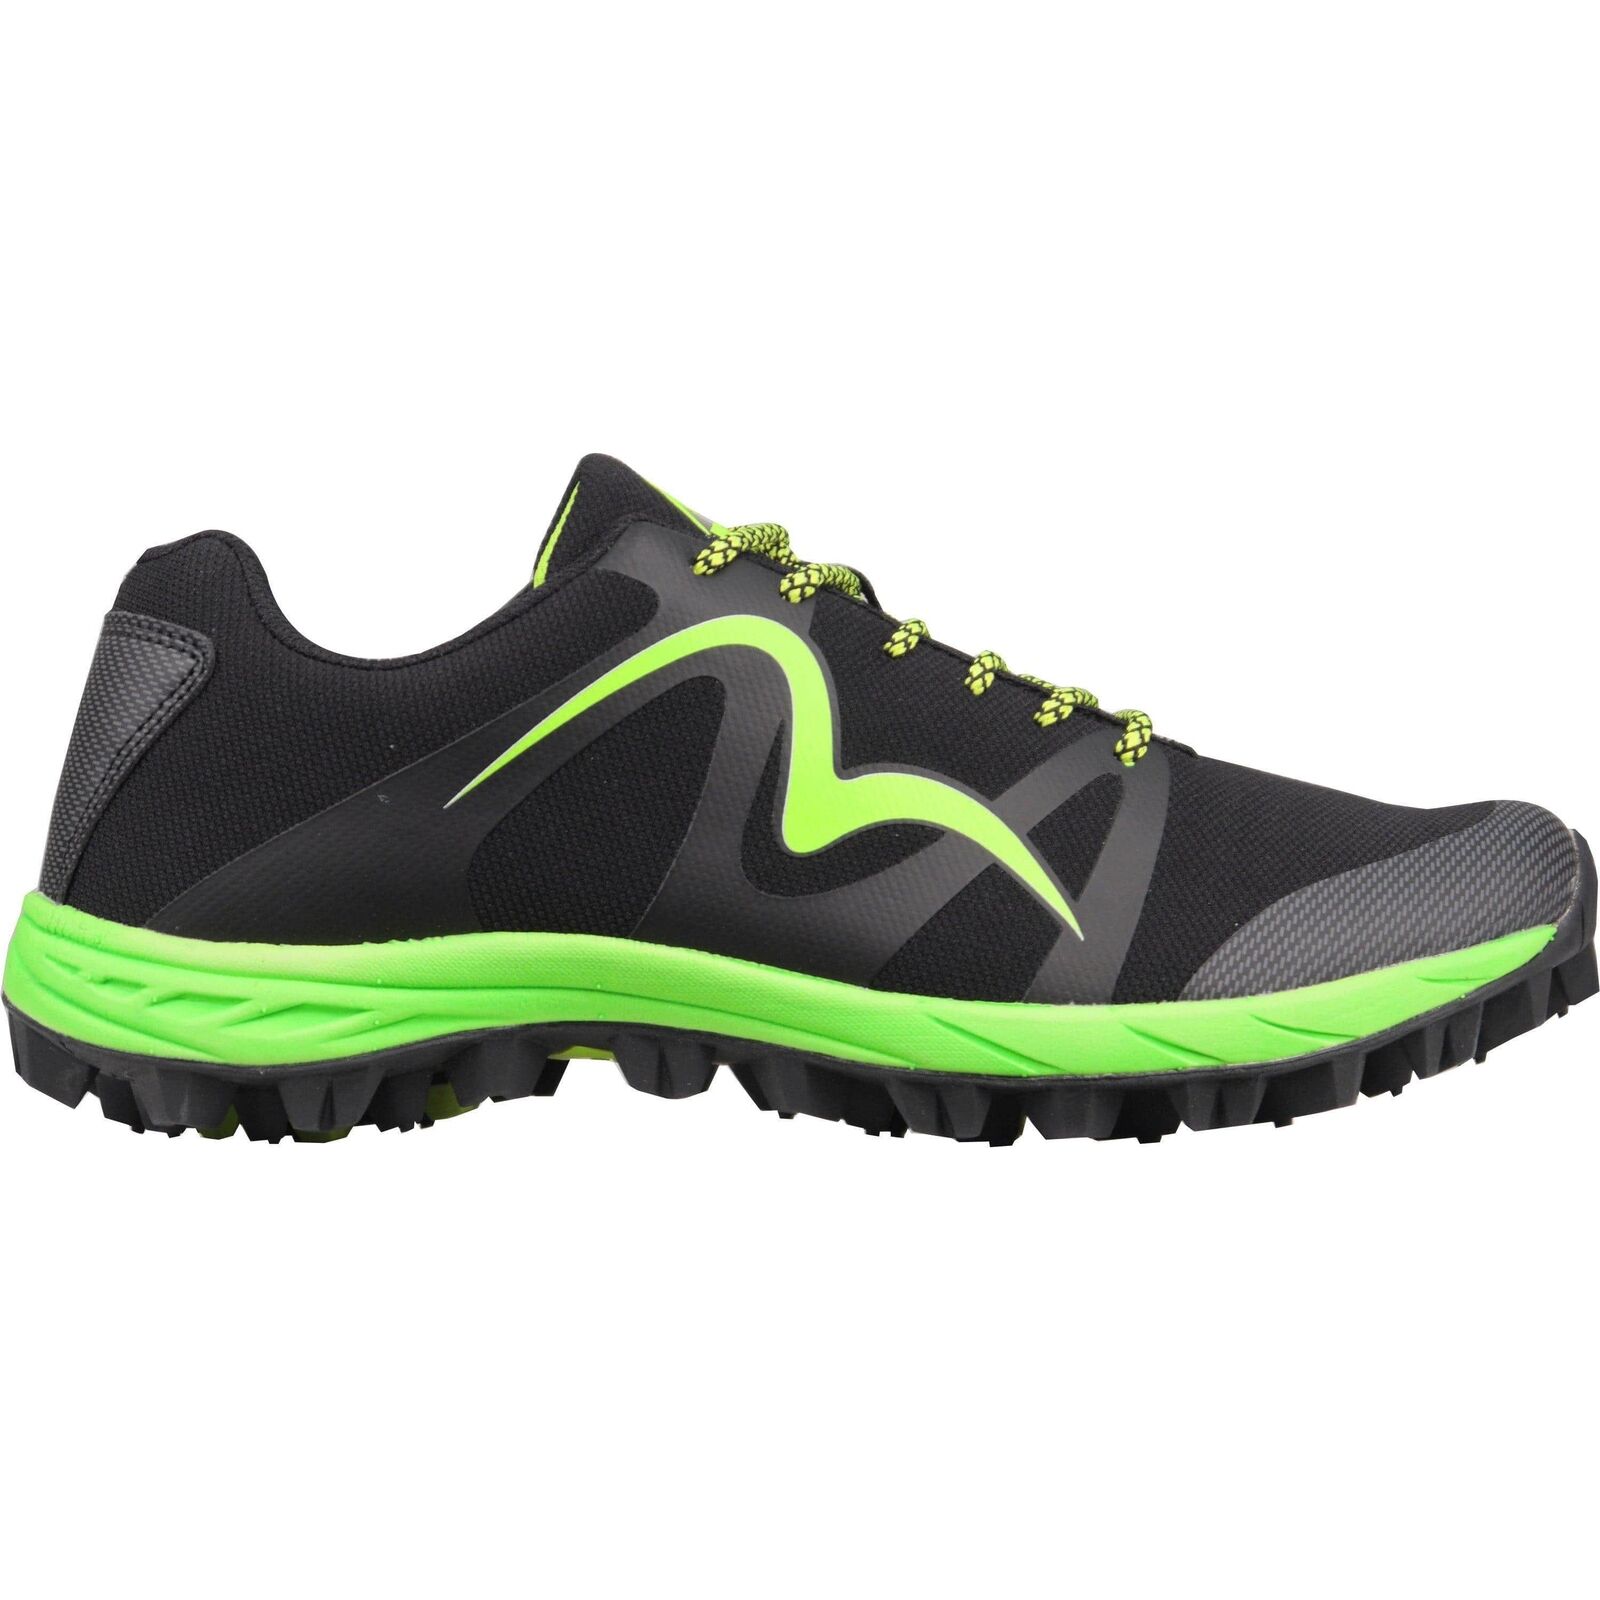 More Mile Cheviot Trail Running Shoes Black